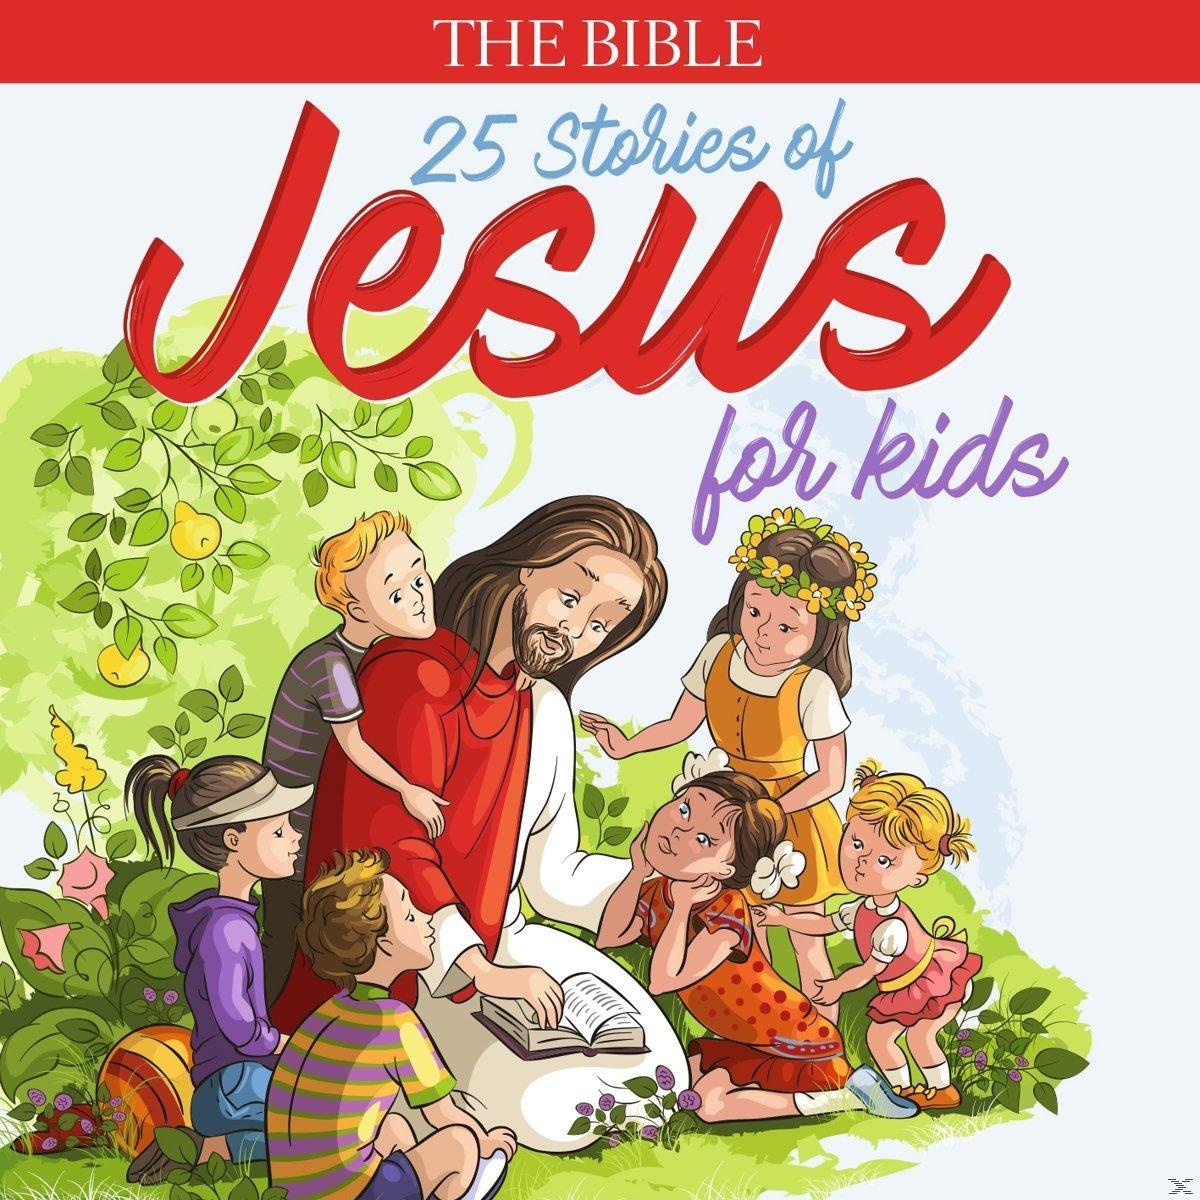 VARIOUS - The (CD) Stories Kinds Jesus For Bible: Of 